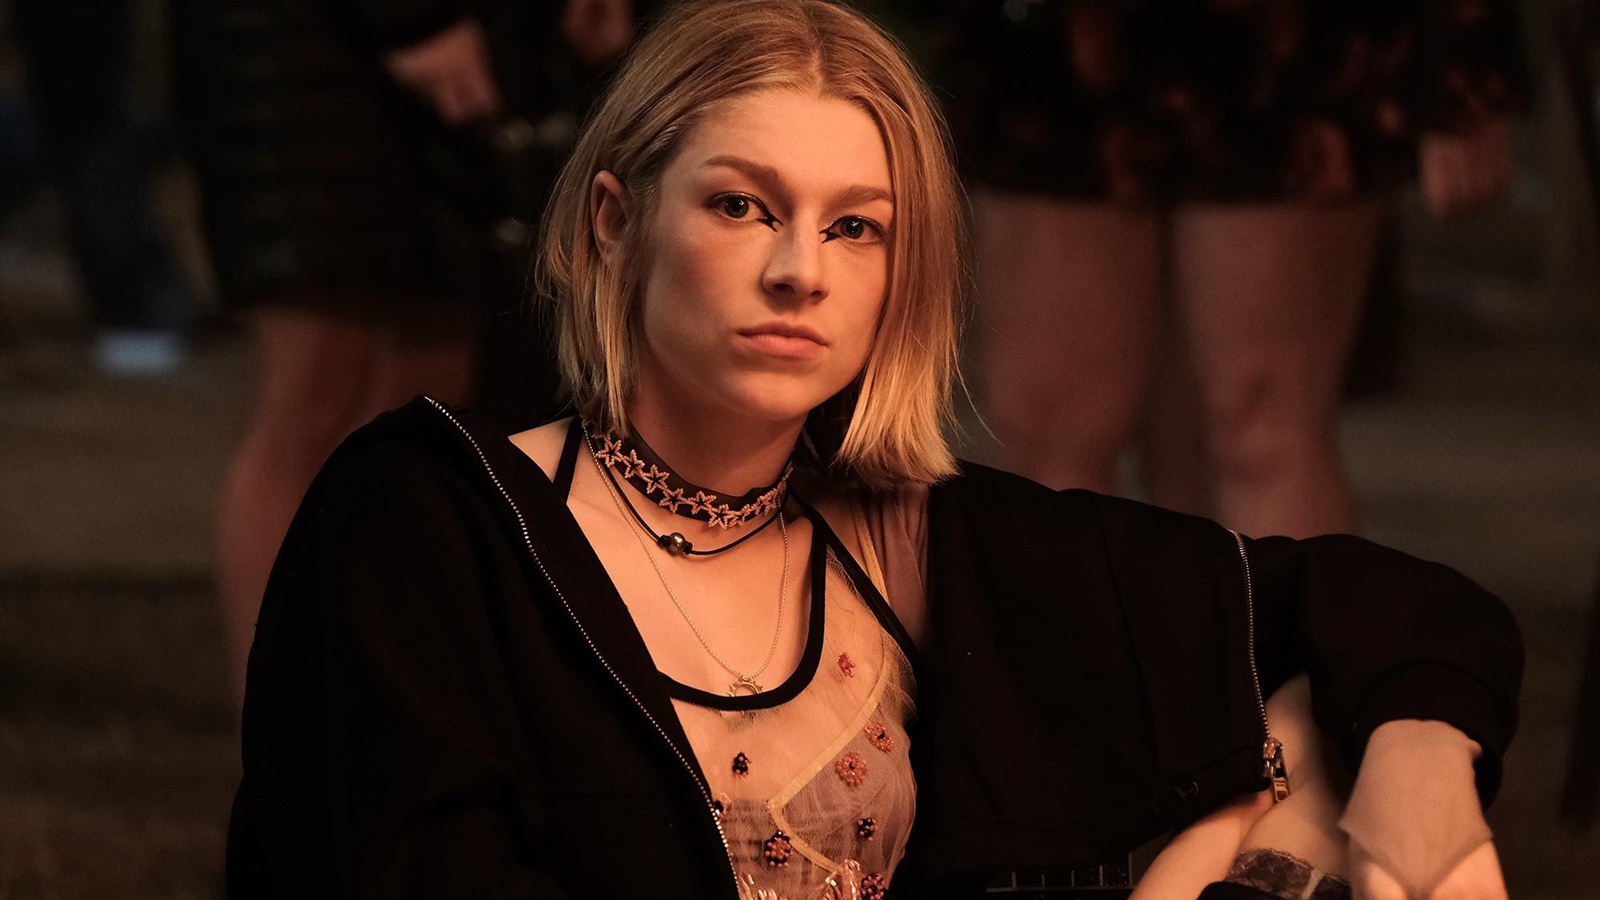 Hunter Schafer among the protagonists of Mother Mary, new film by David Lowery